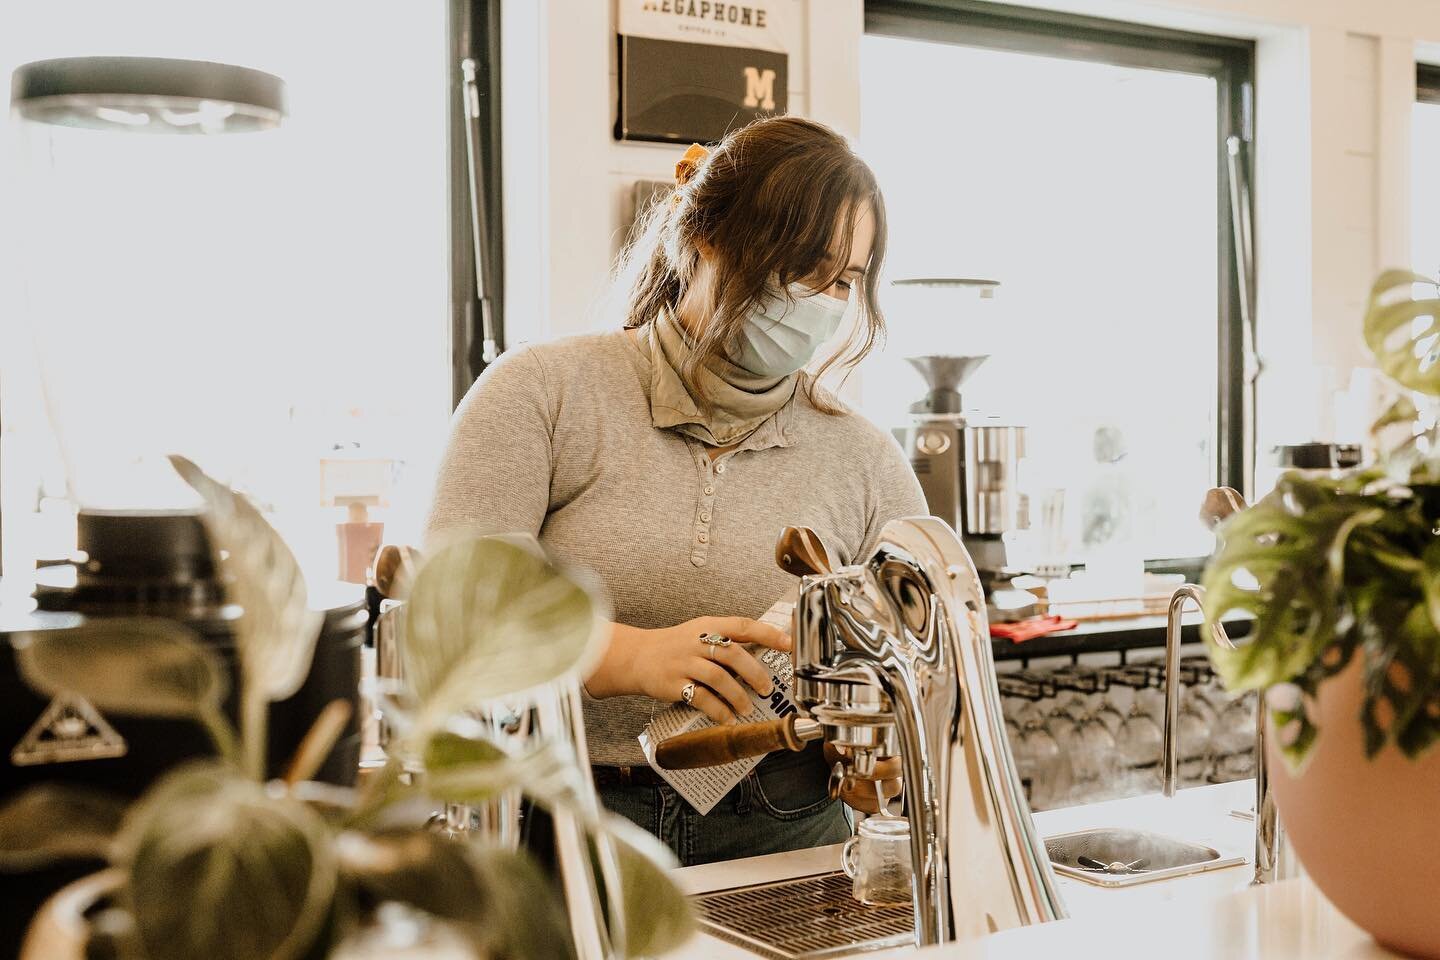 Stay &amp; sip with us ☕️ We love seeing people hang in the shop again. Whether it&rsquo;s to get some work done or beat the cold, we got you! See ya for coffee + treats tomorrow 7:00-1:00 👌🏻

.
.
.
.
.
.
#megaphonecoffee #laceemup #coffeetime #inb